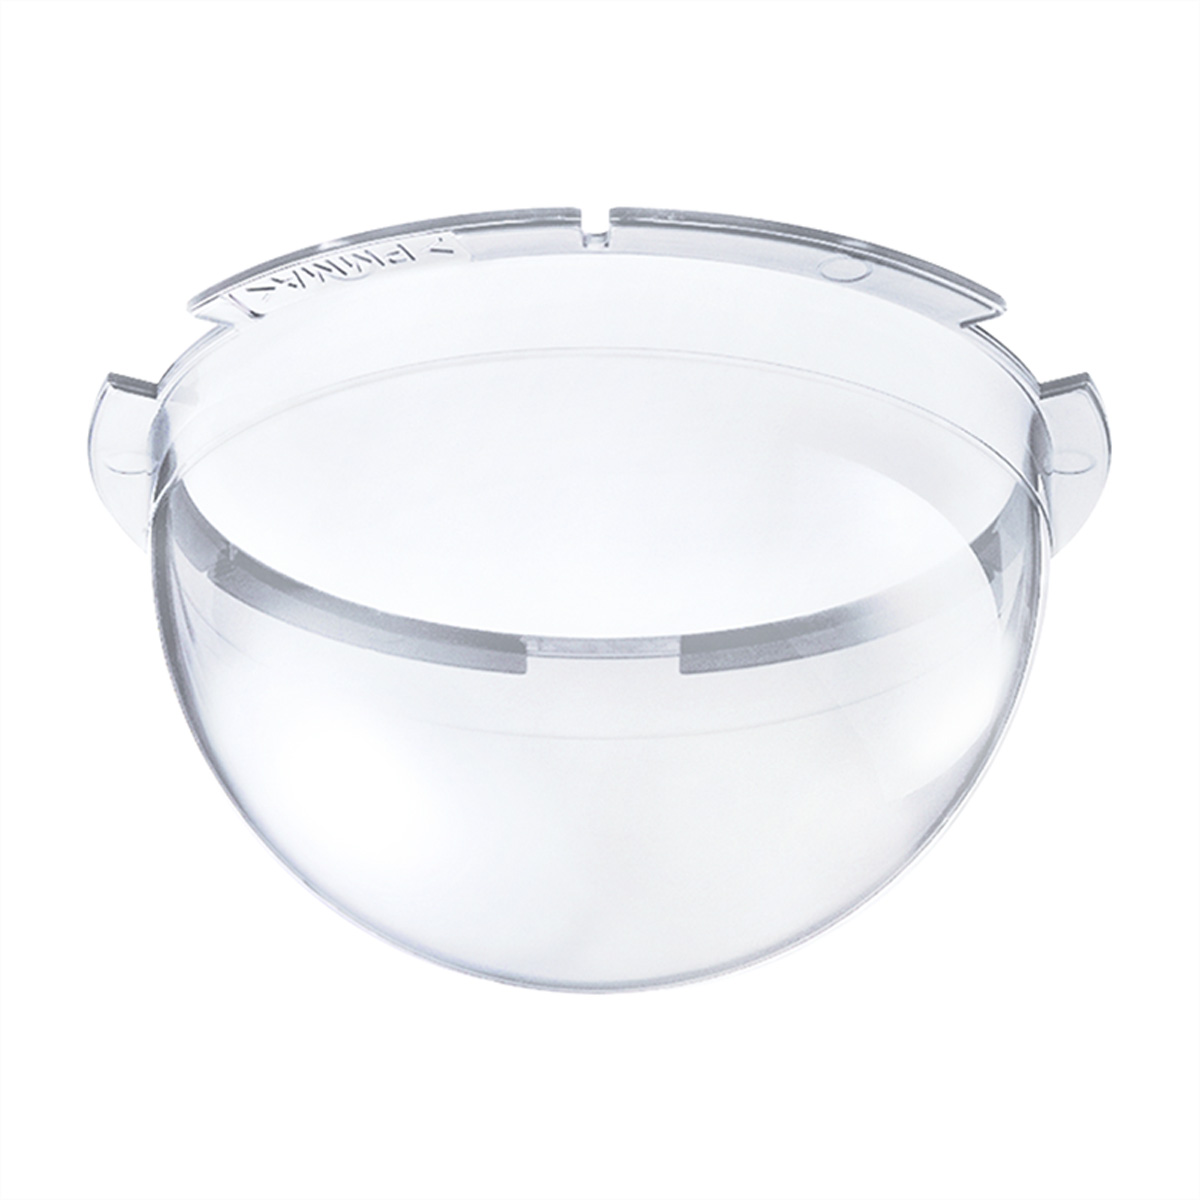 i-PRO WV-QDC101C Bracket, Clear Dome Cover